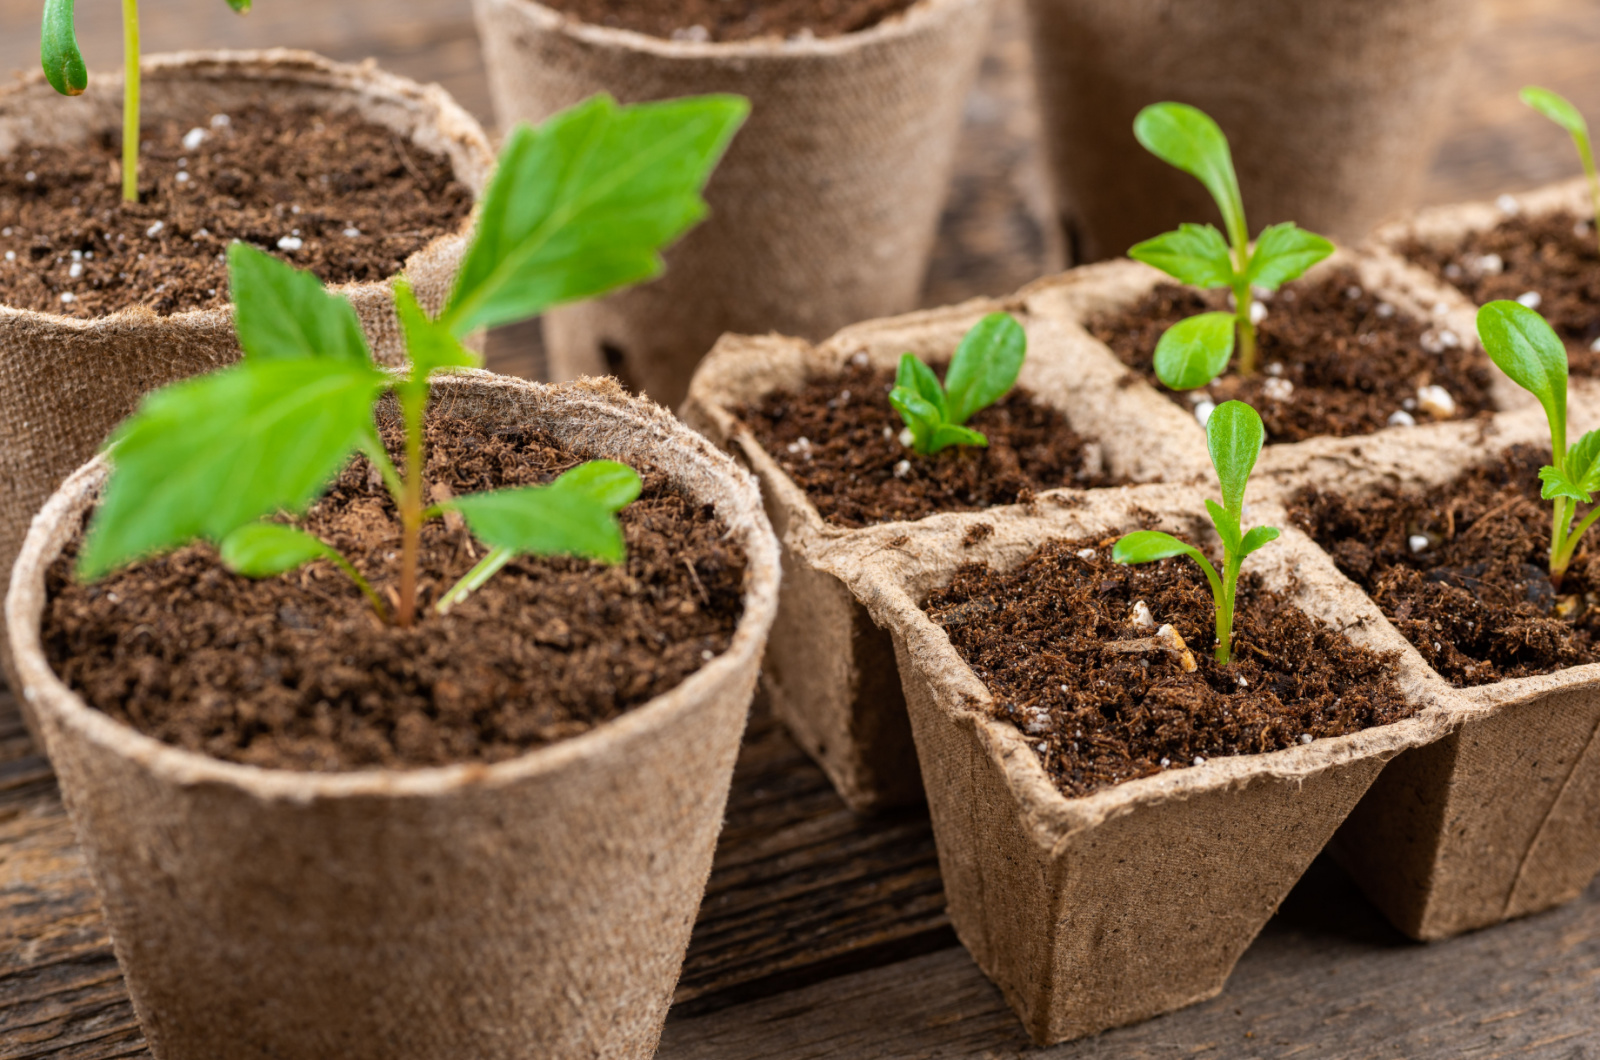 Potted flower seedlings growing in biodegradable peat moss pots